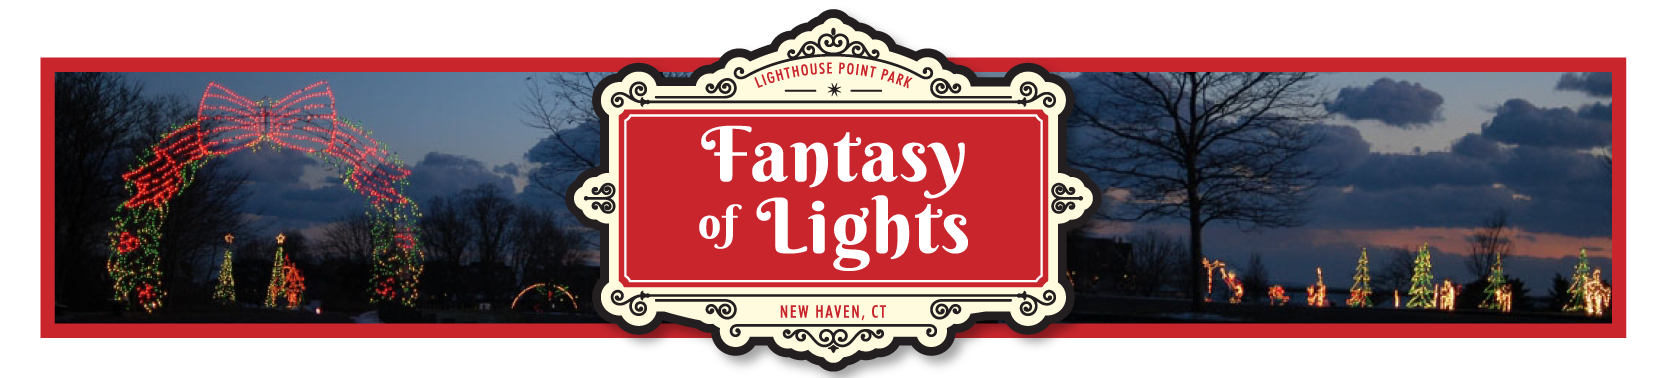 Fantasy Lights - Goodwill of Southern New England